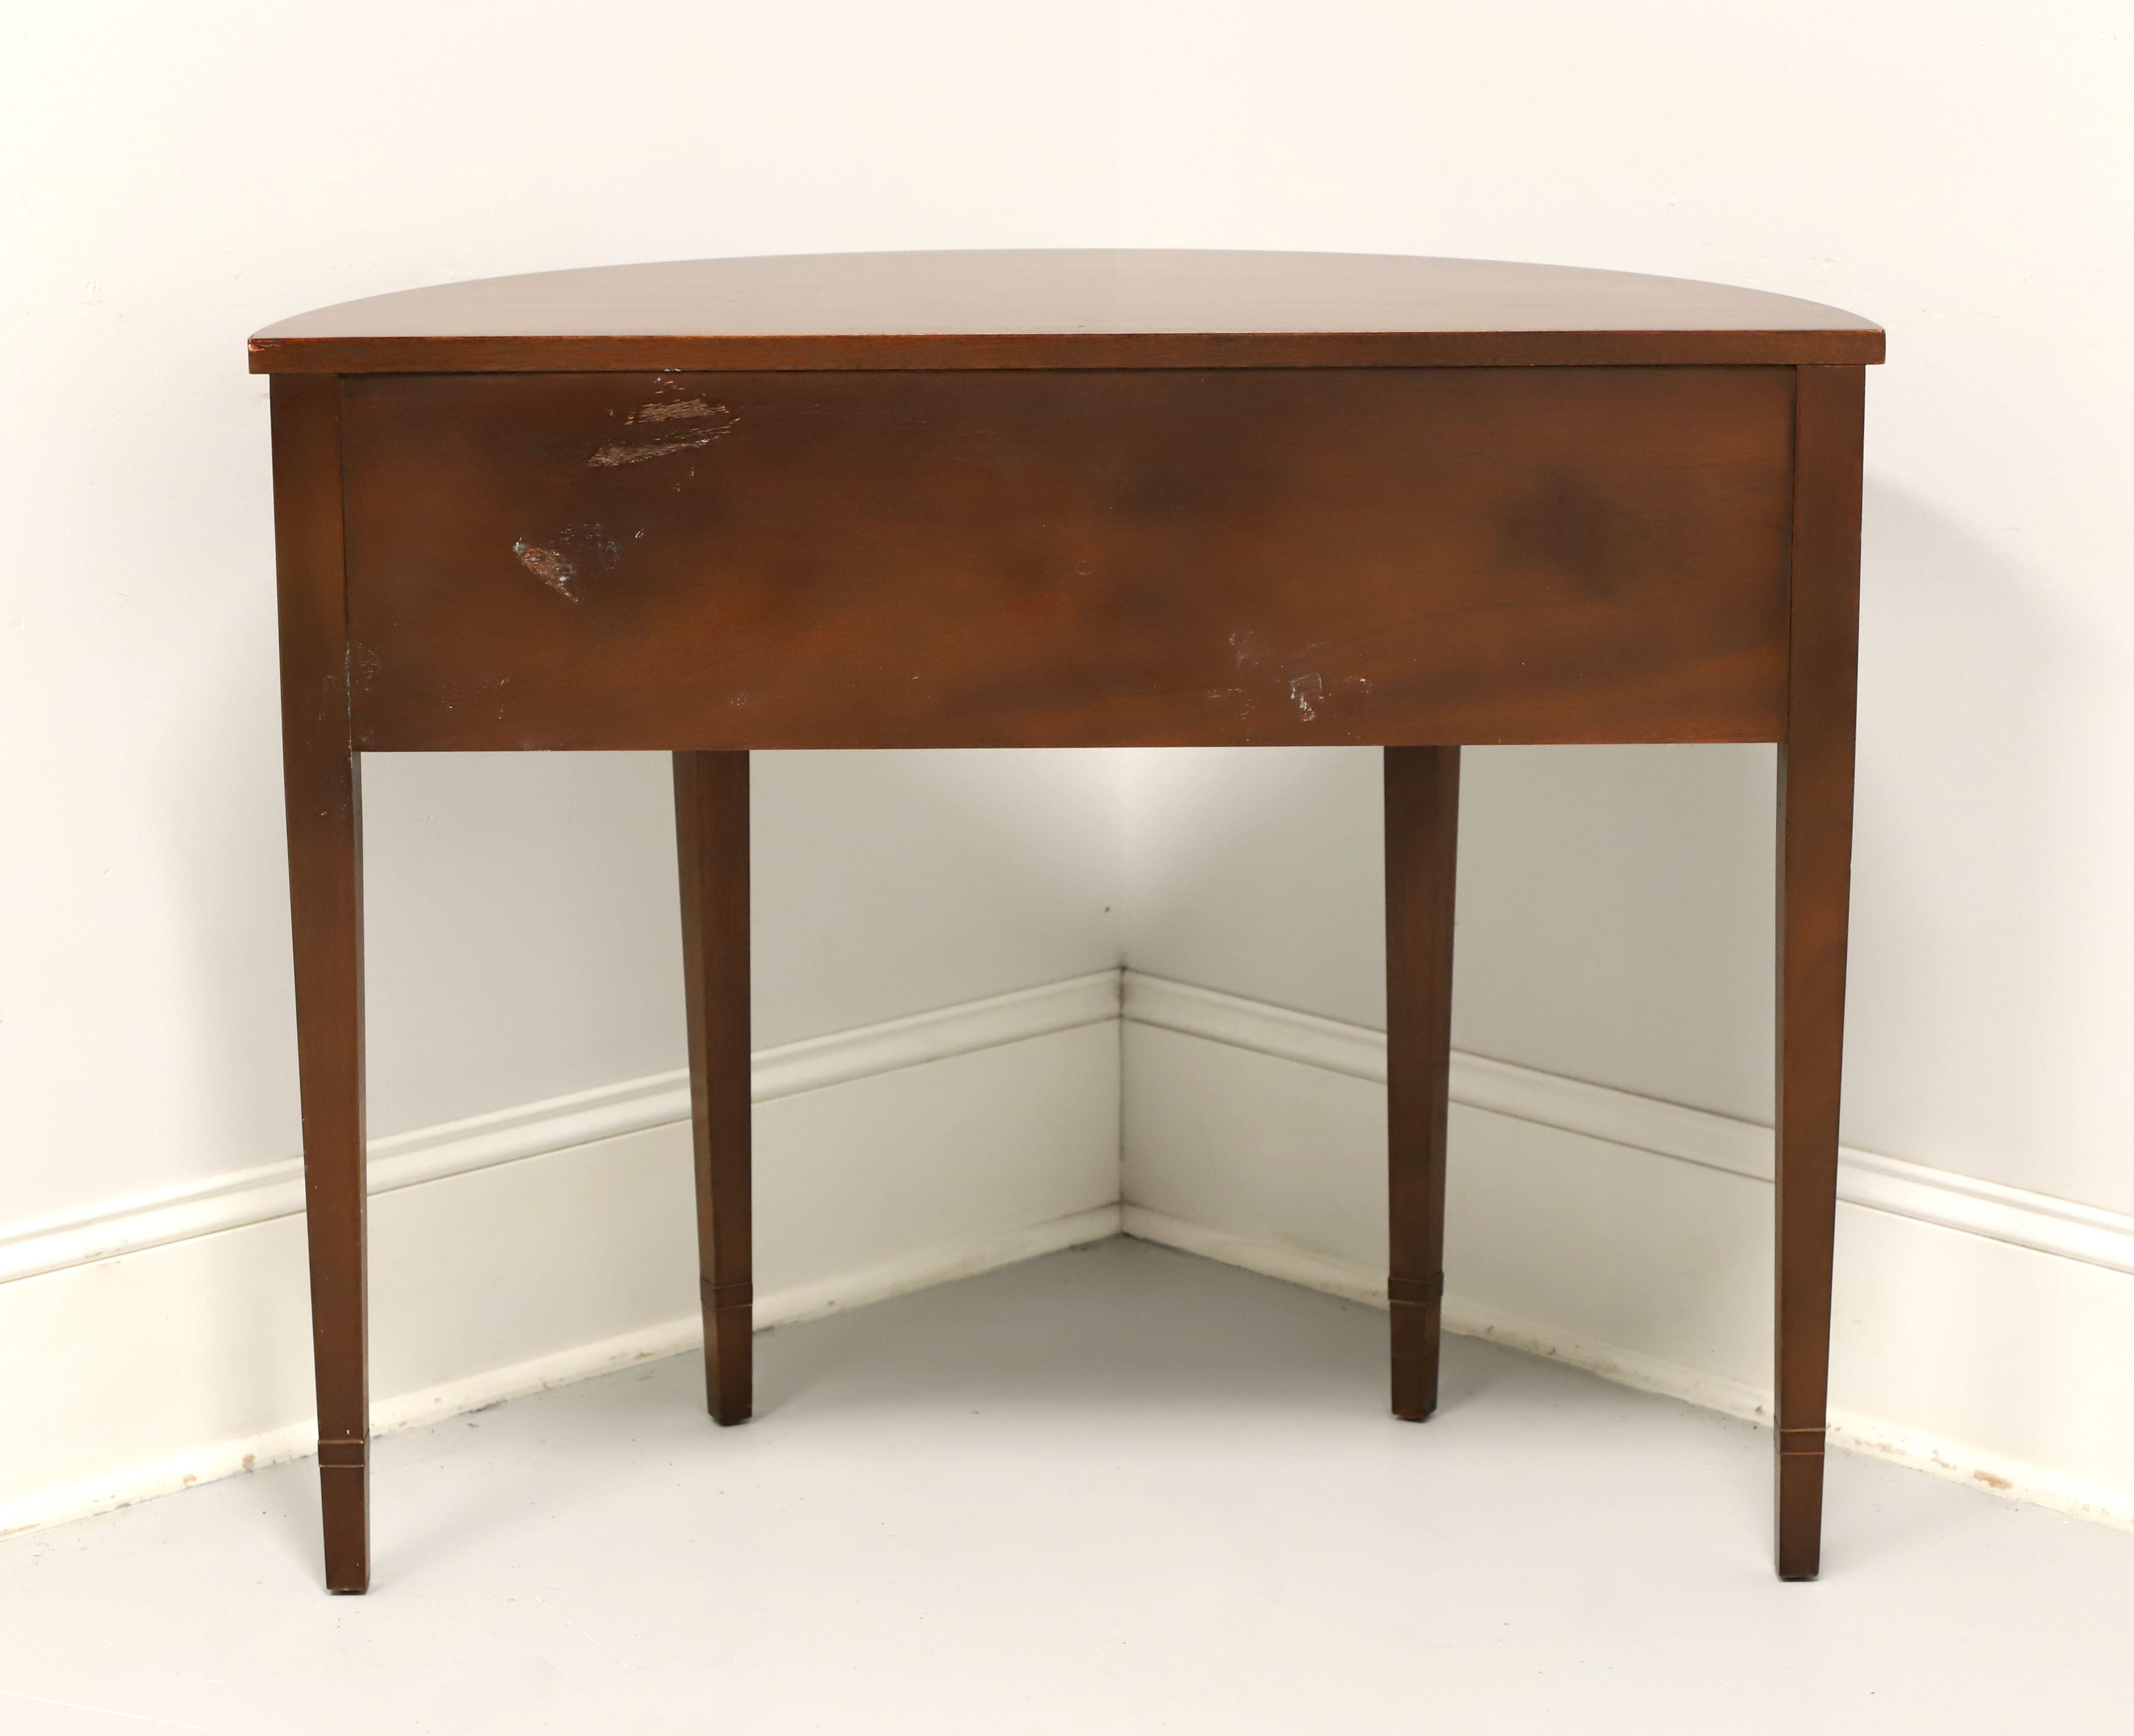 20th Century BAKER Inlaid Mahogany Hepplewhite Demilune Console Table / Server - A